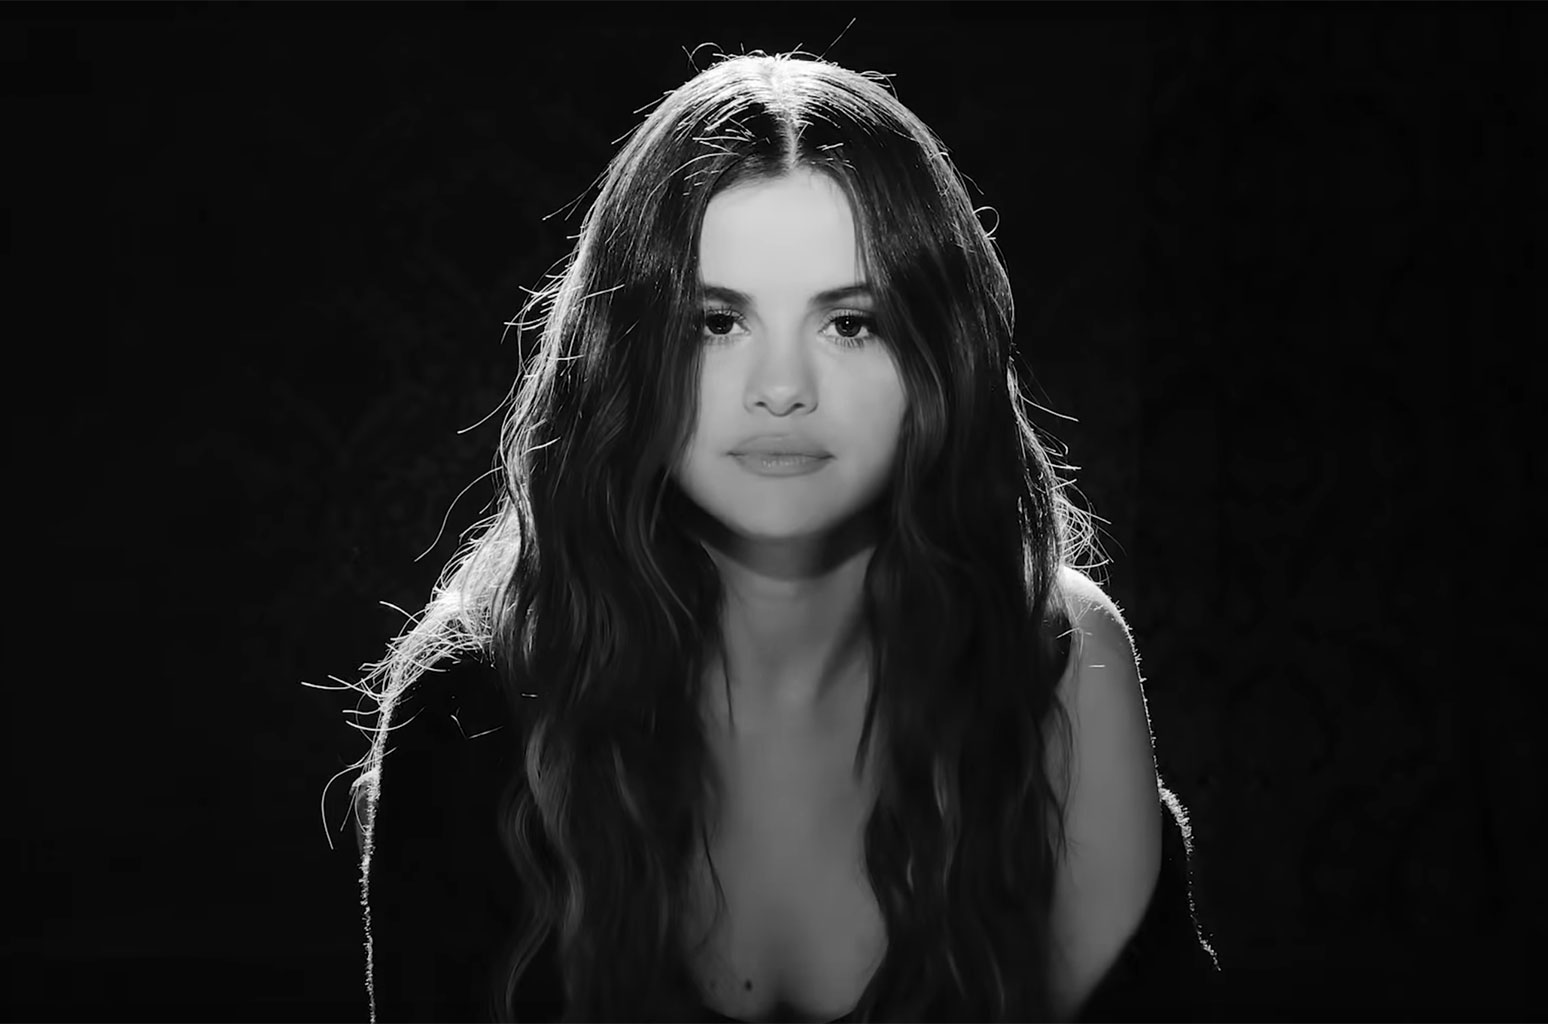 REPORT: Selena Gomez’s Newest Single Arriving THIS MONTH